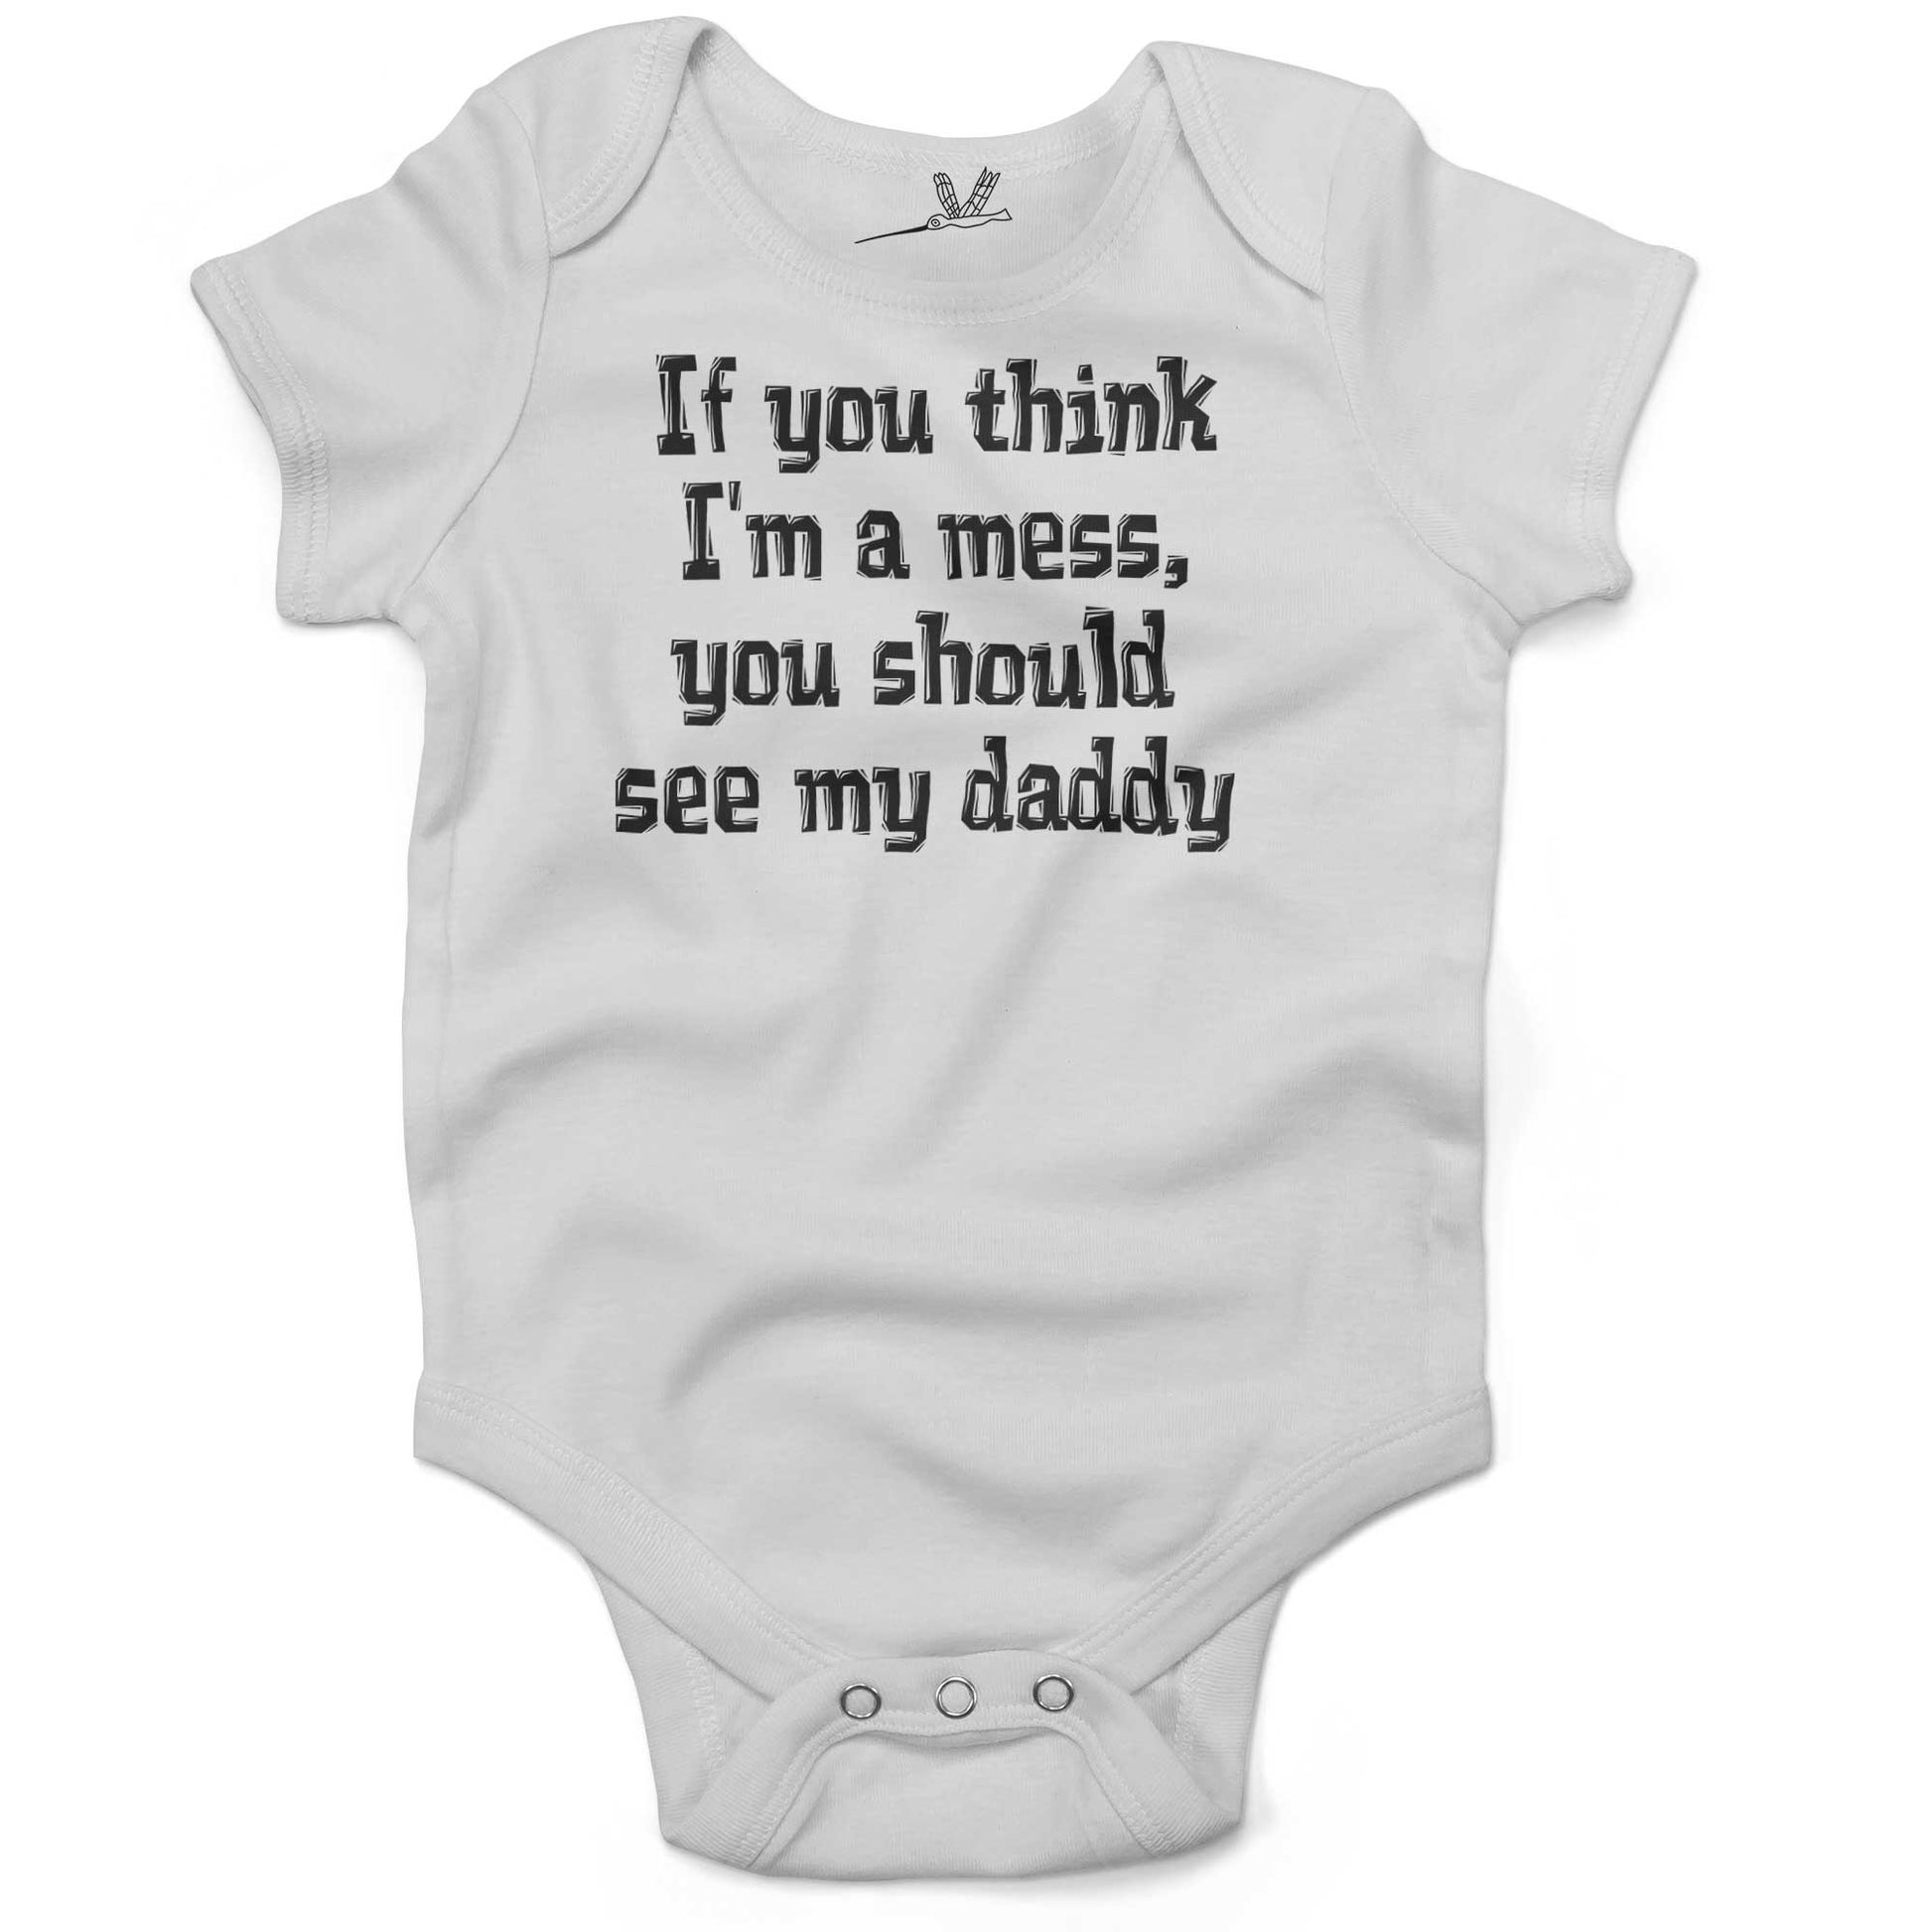 If You Think I'm A Mess, You Should See My Daddy Infant Bodysuit or Raglan Tee-White-3-6 months